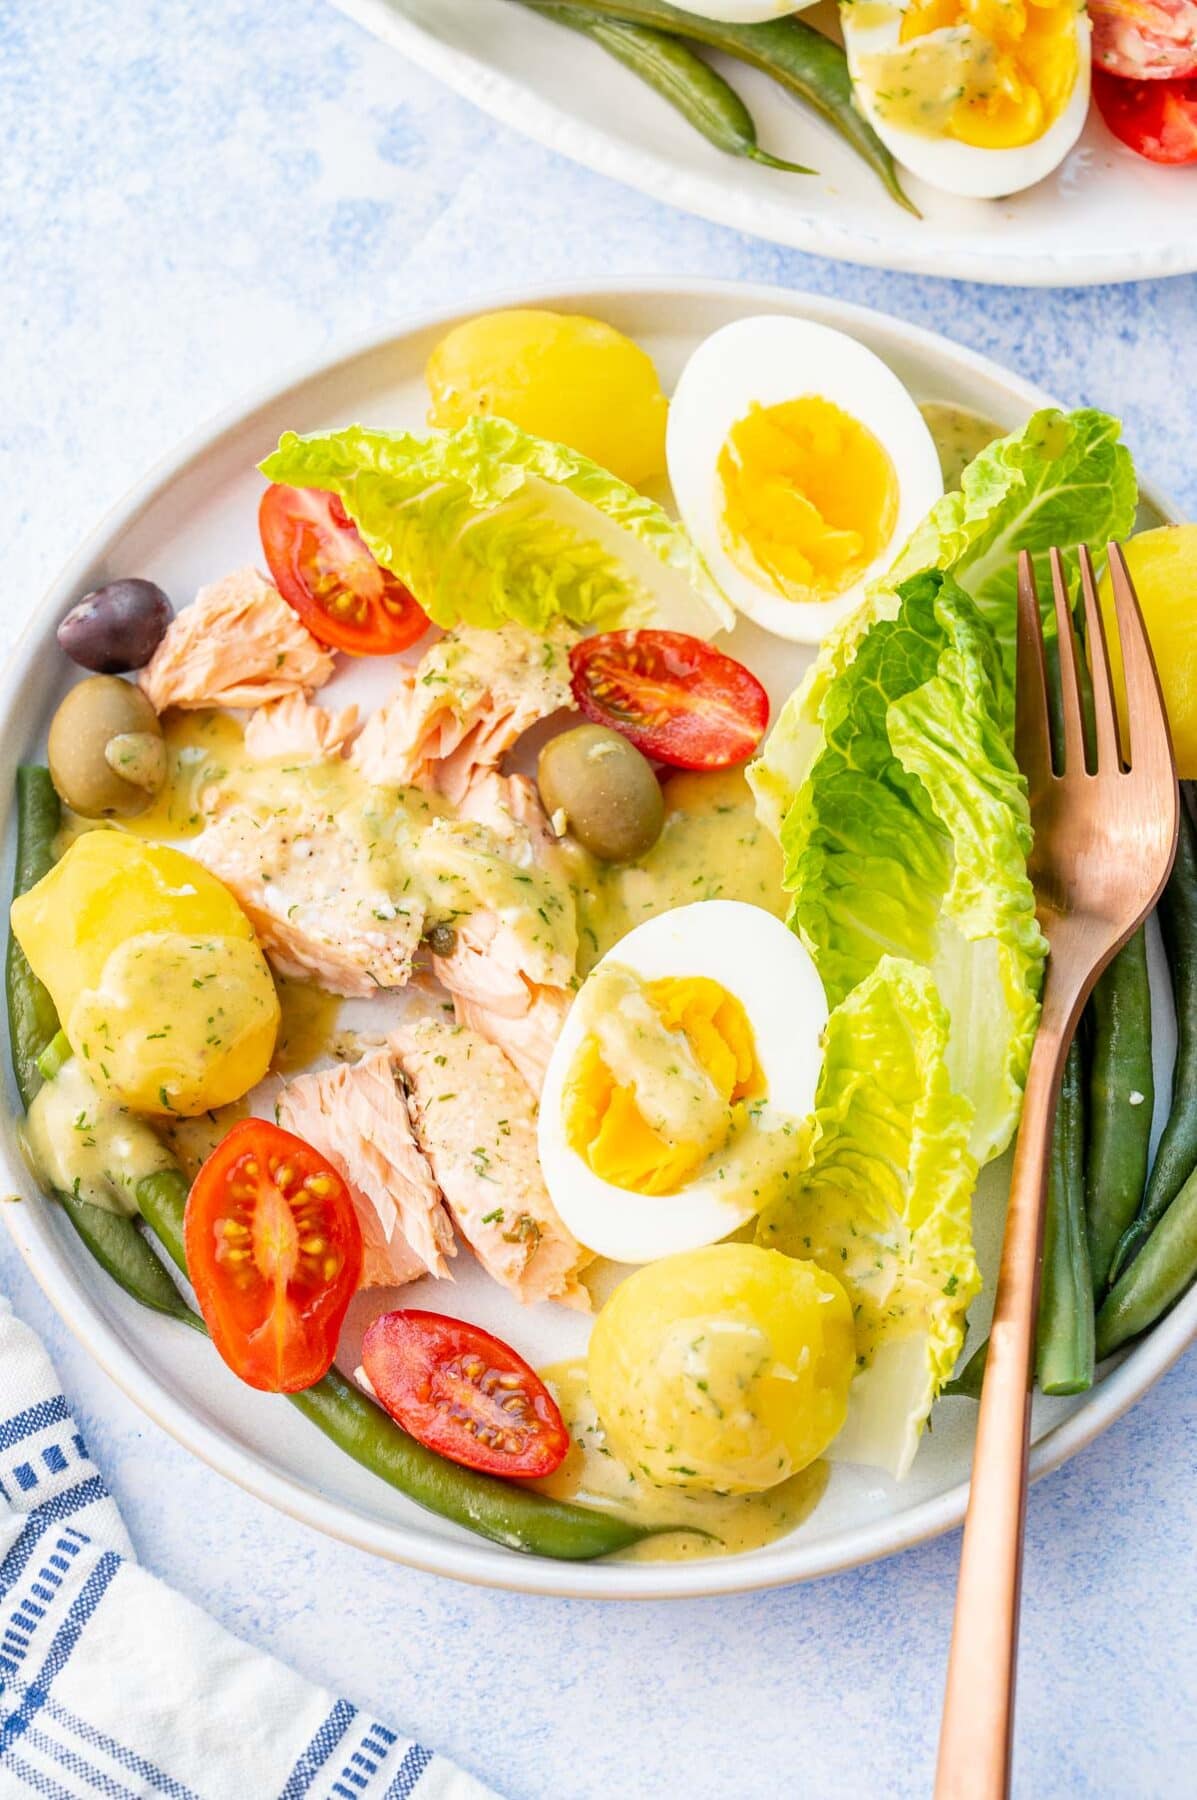 One serving of Salmon Nicoise salad on a white plate.